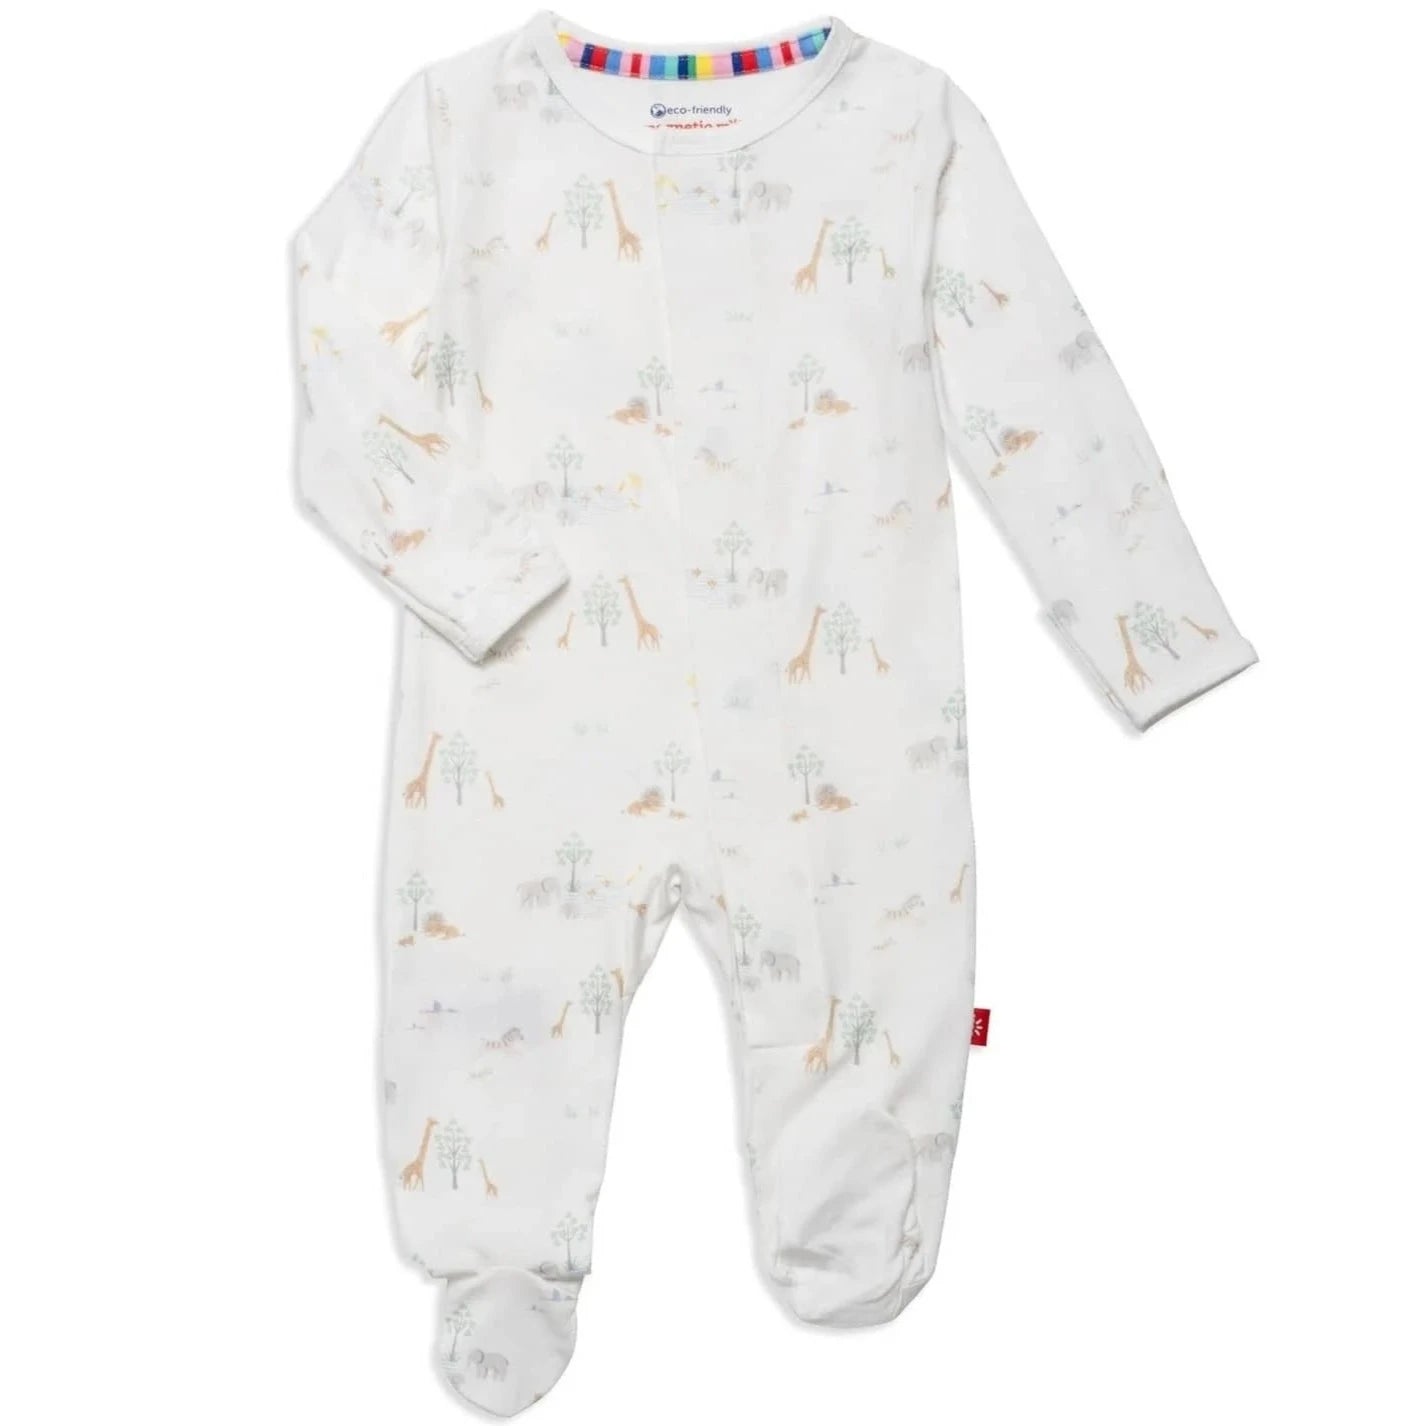 White long sleeve baby onesie with giraffes on it